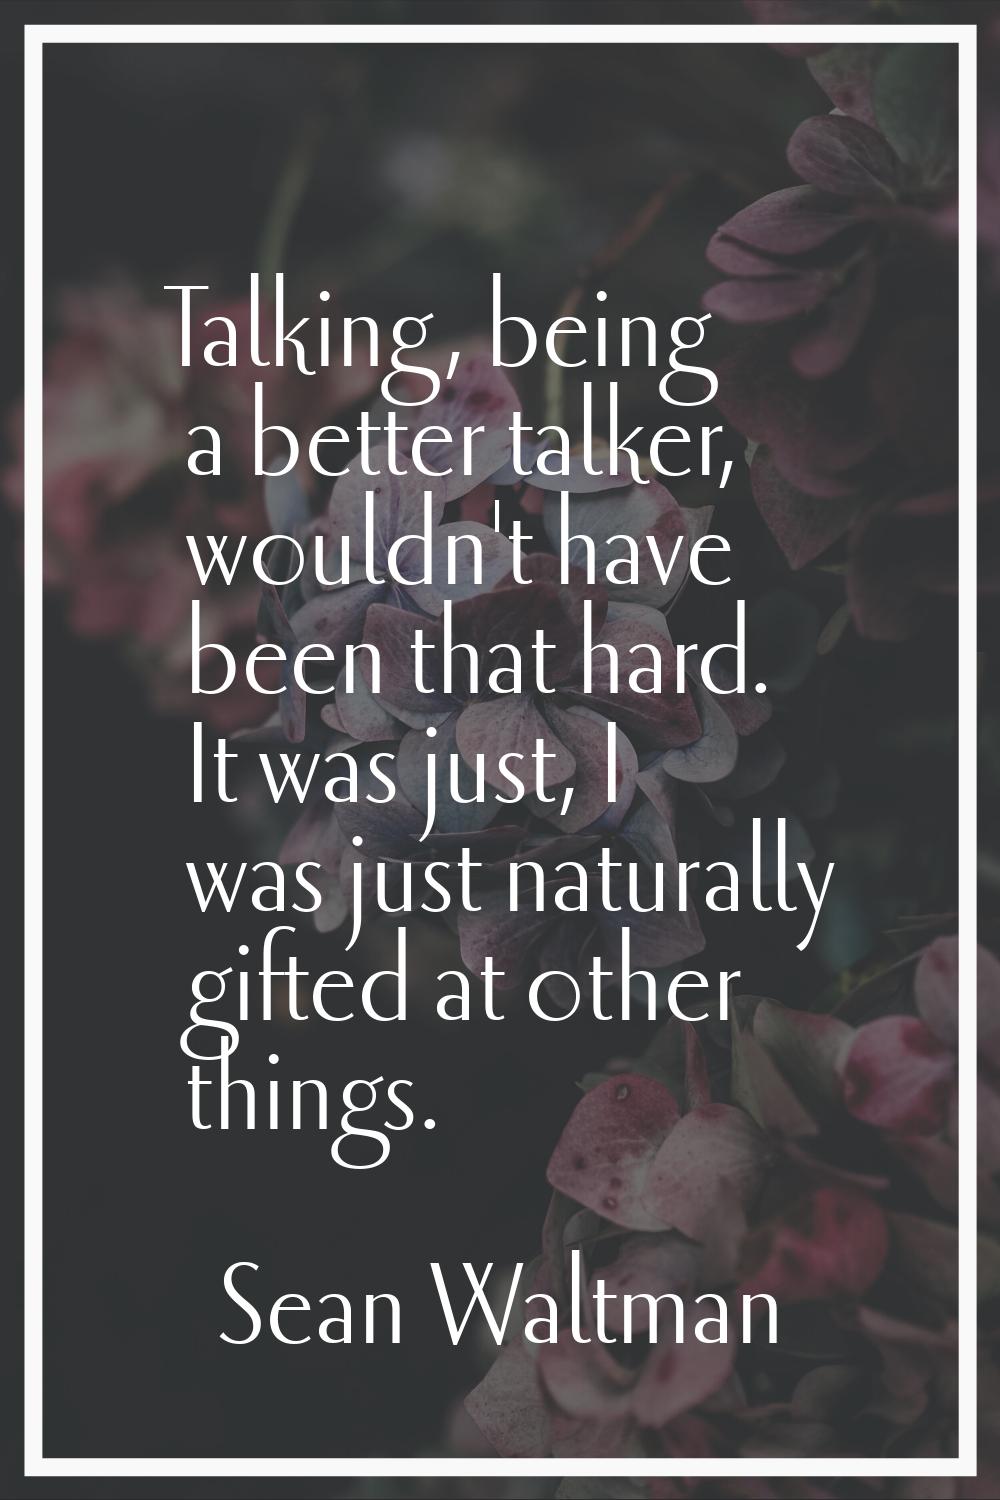 Talking, being a better talker, wouldn't have been that hard. It was just, I was just naturally gif